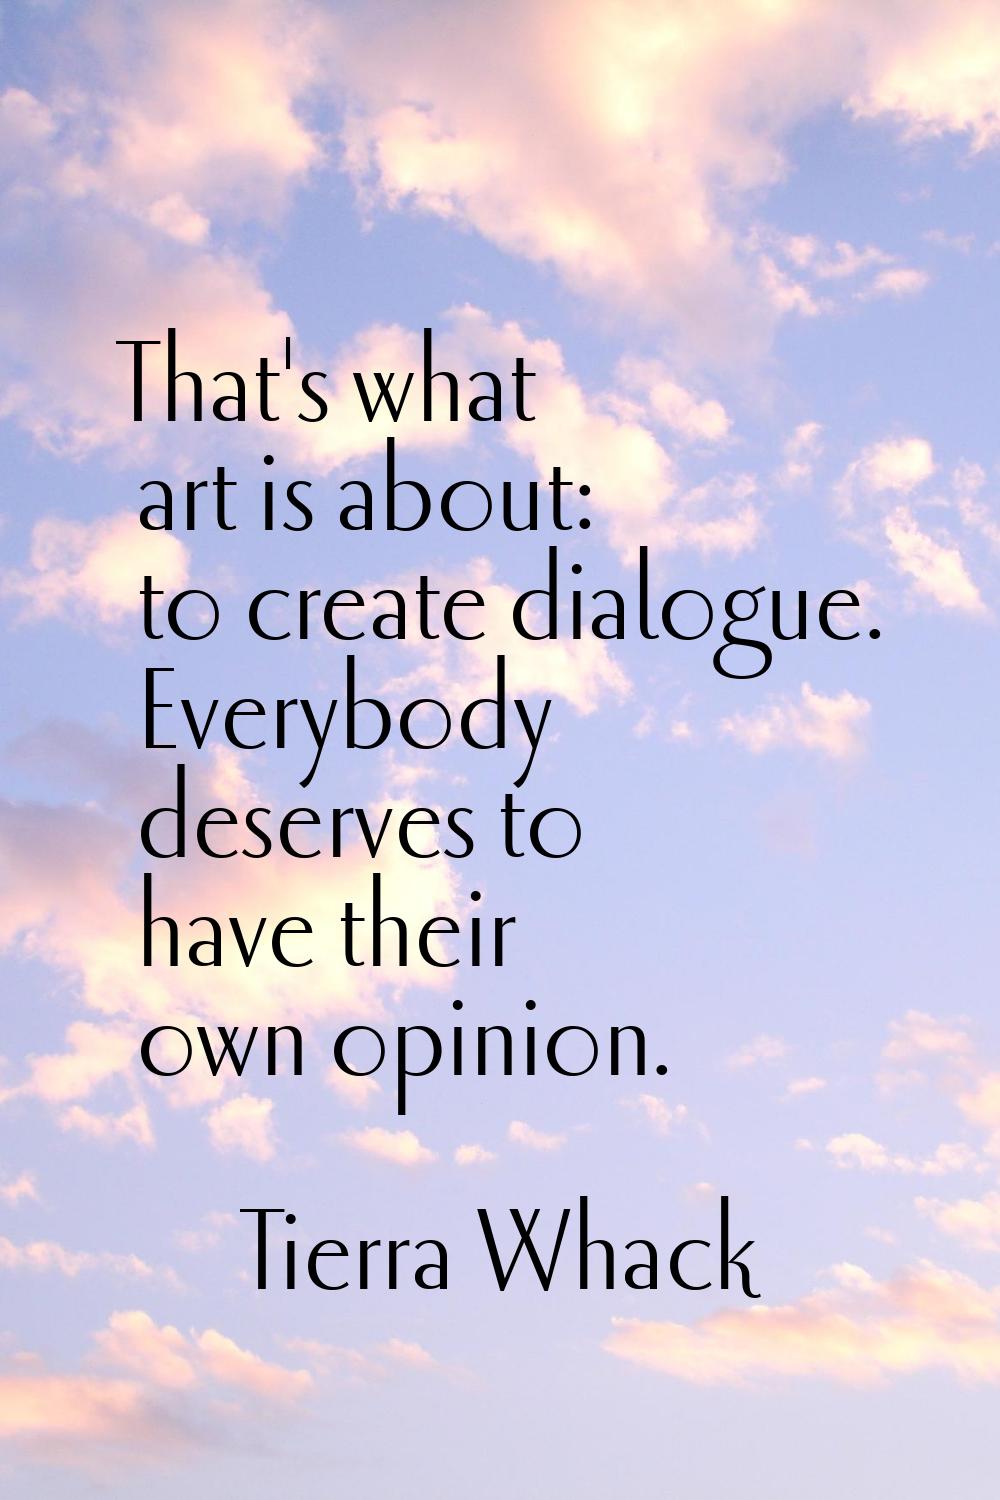 That's what art is about: to create dialogue. Everybody deserves to have their own opinion.